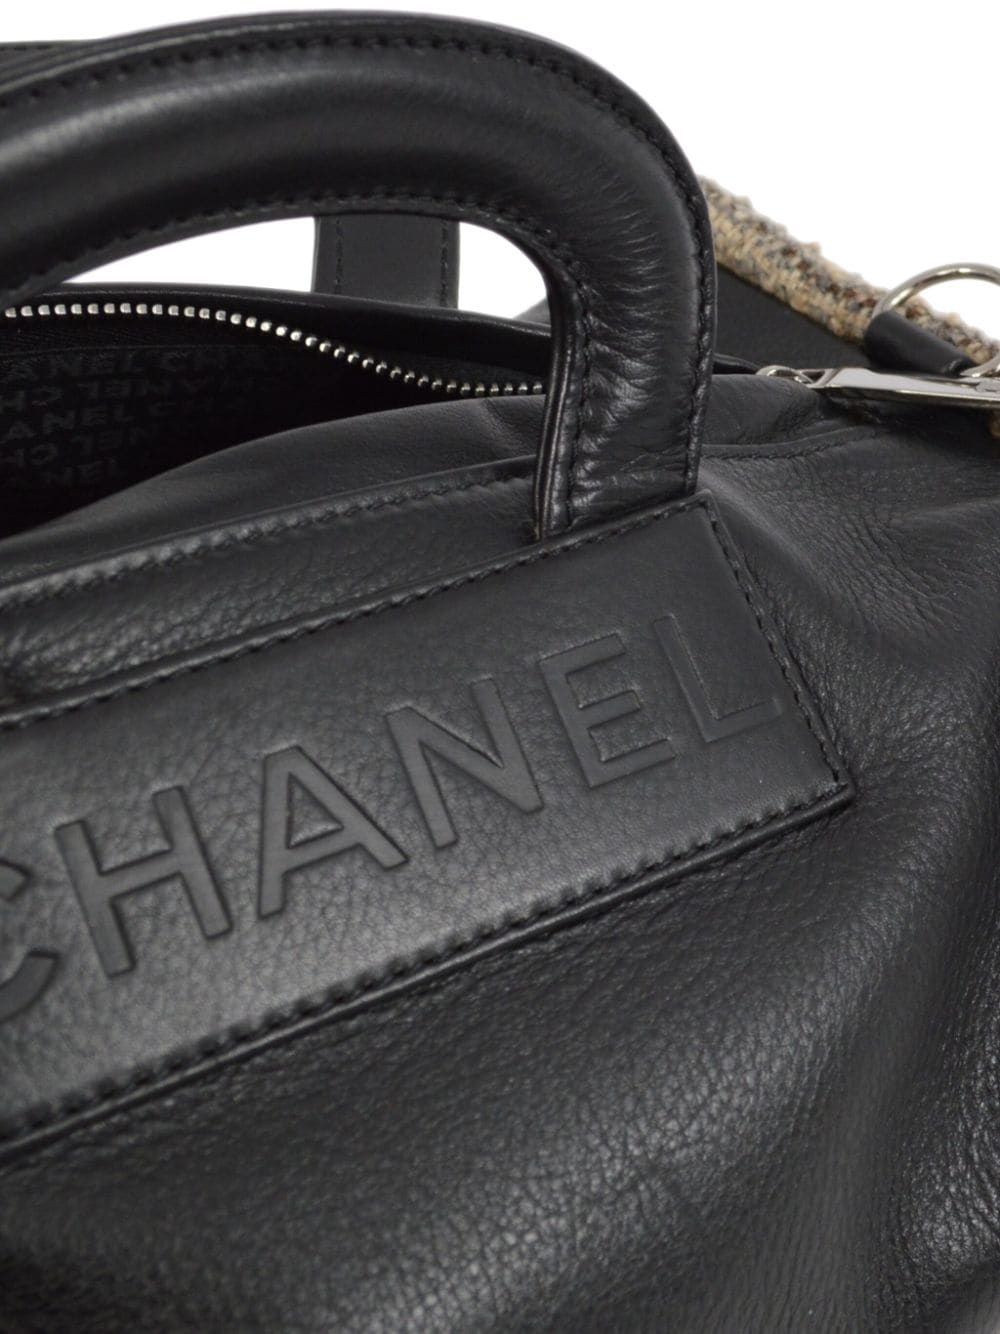 Pre-owned Chanel 2003 Two-way Leather Handbag In Black